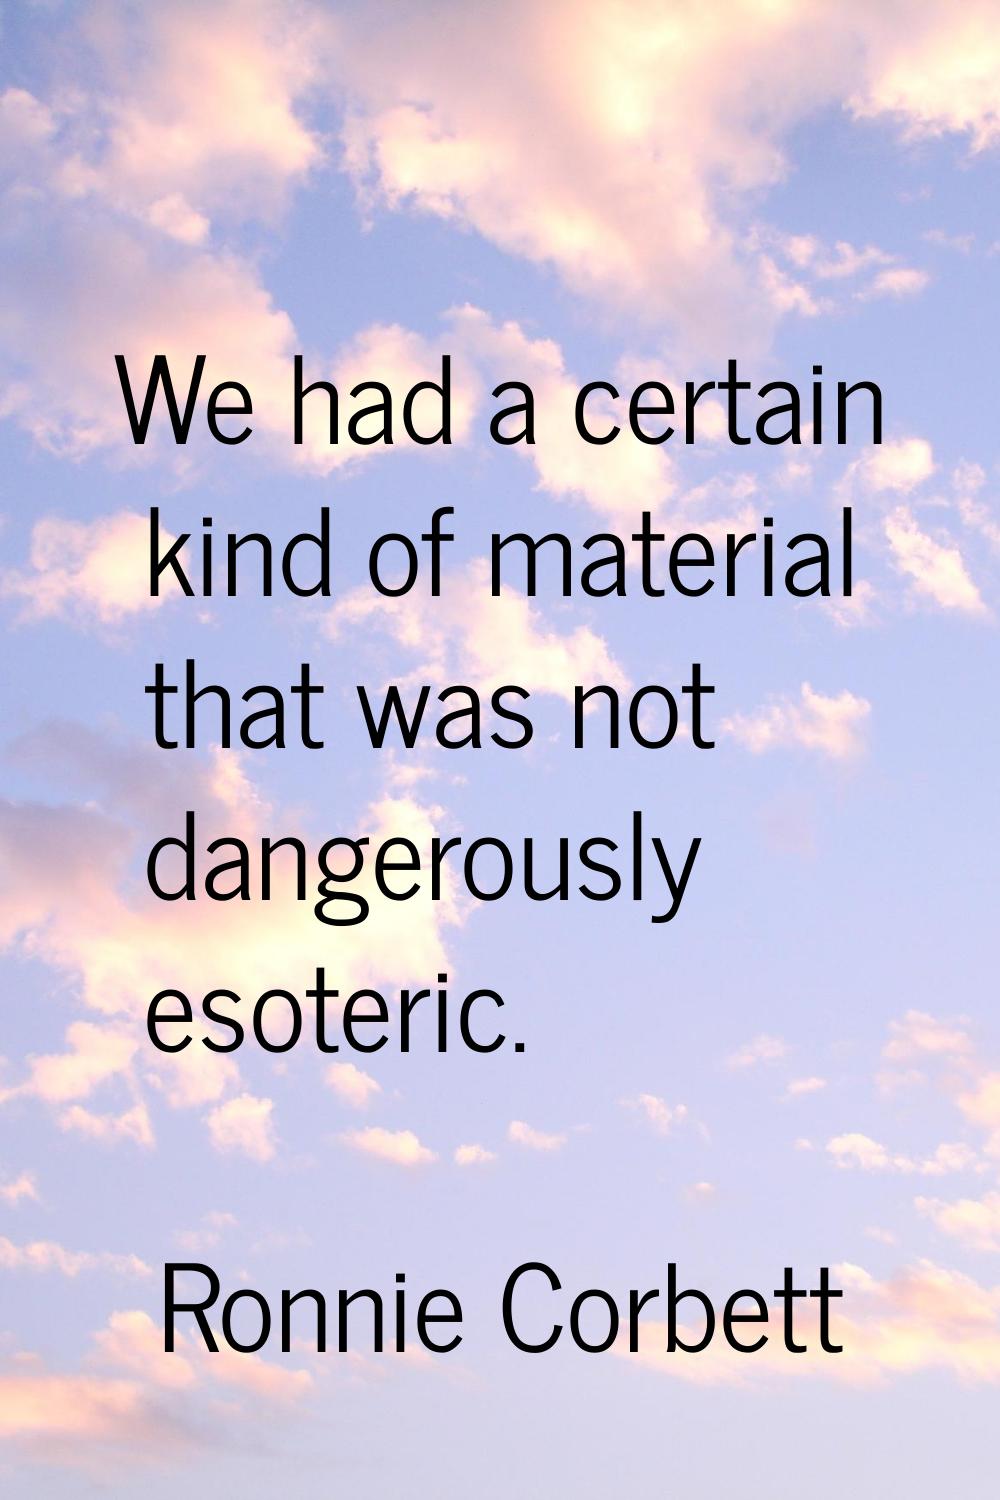 We had a certain kind of material that was not dangerously esoteric.